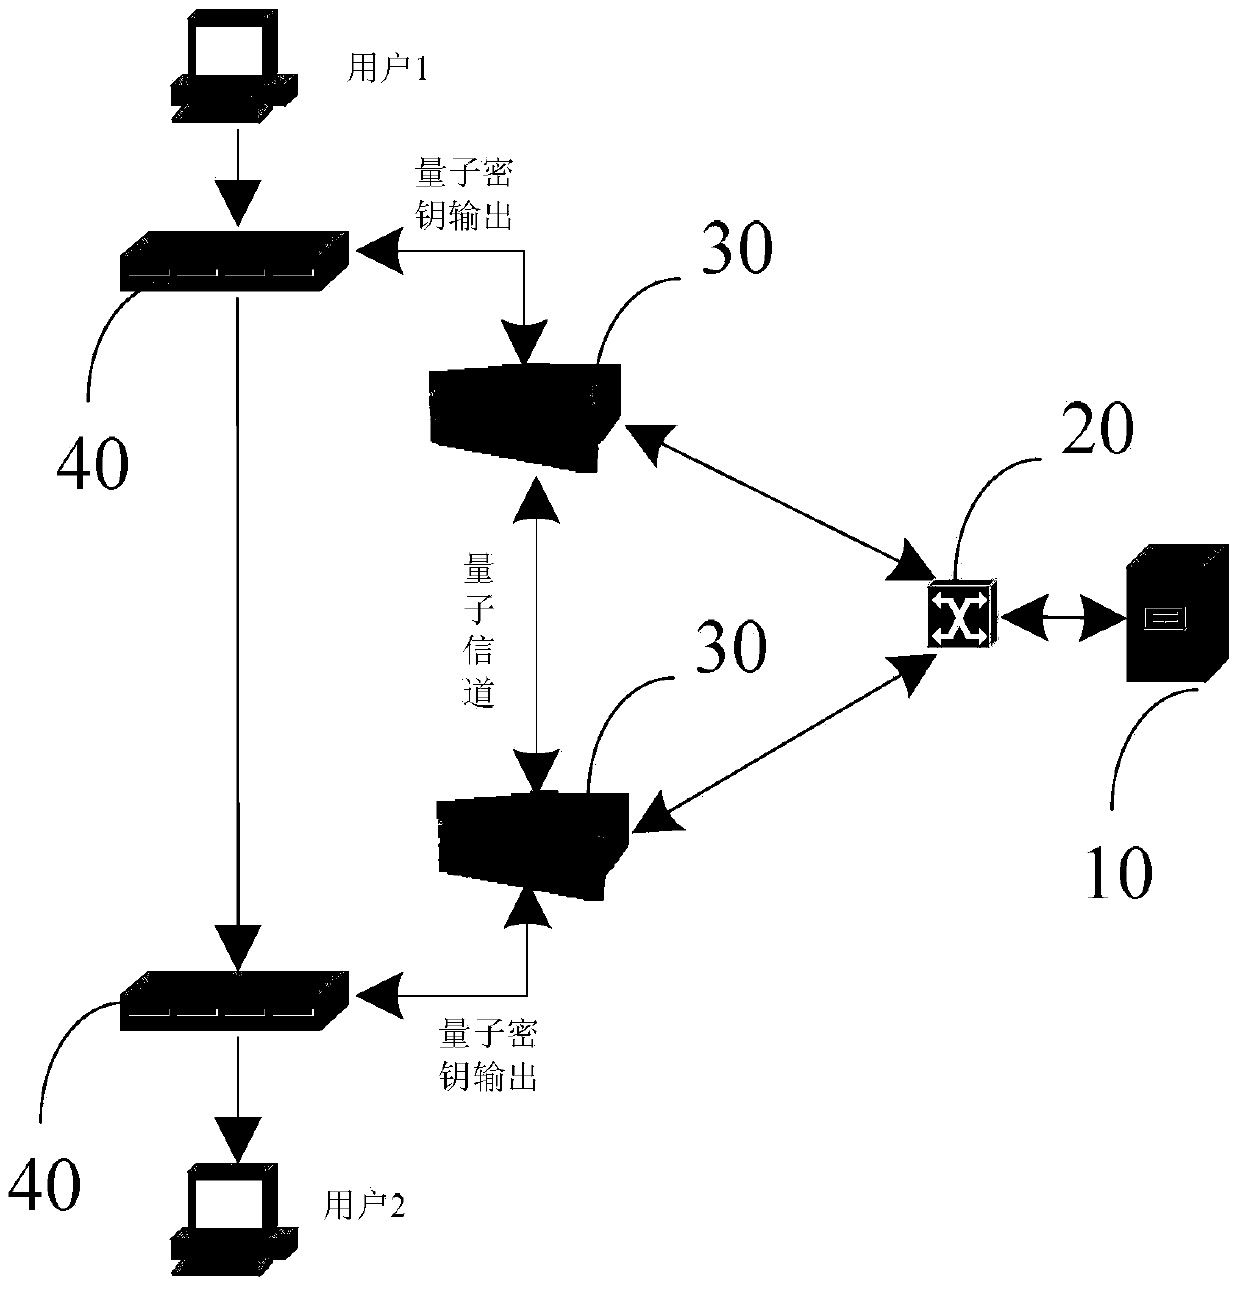 Electric power security communication network based on quantum key distribution technology